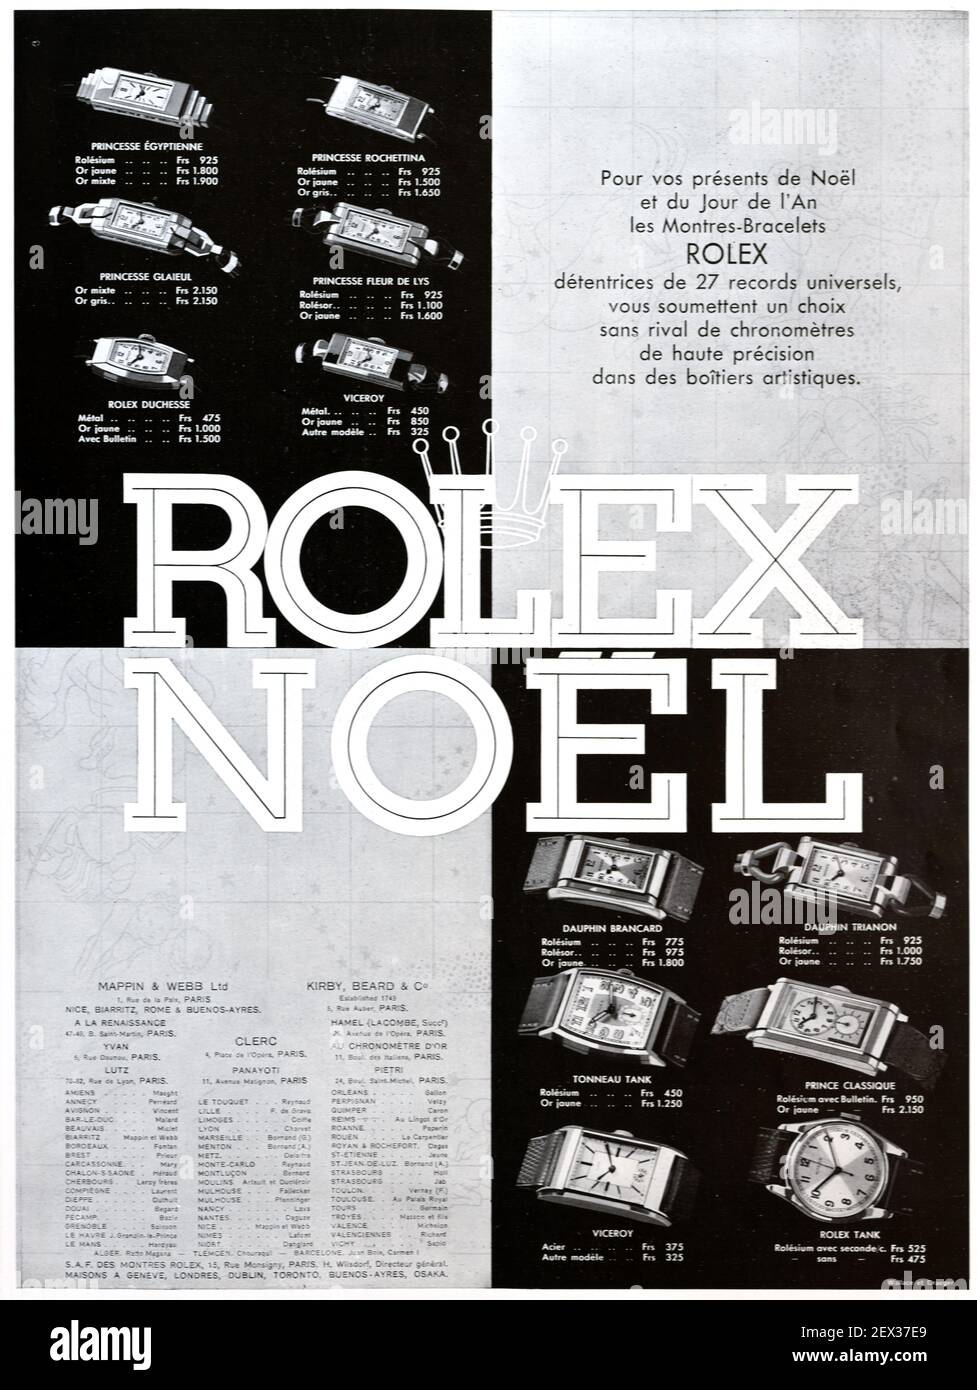 Vintage Advert, Advertisement or Publicy for Rolex Watches as Christmas  Gift 1935 Illustration Stock Photo - Alamy